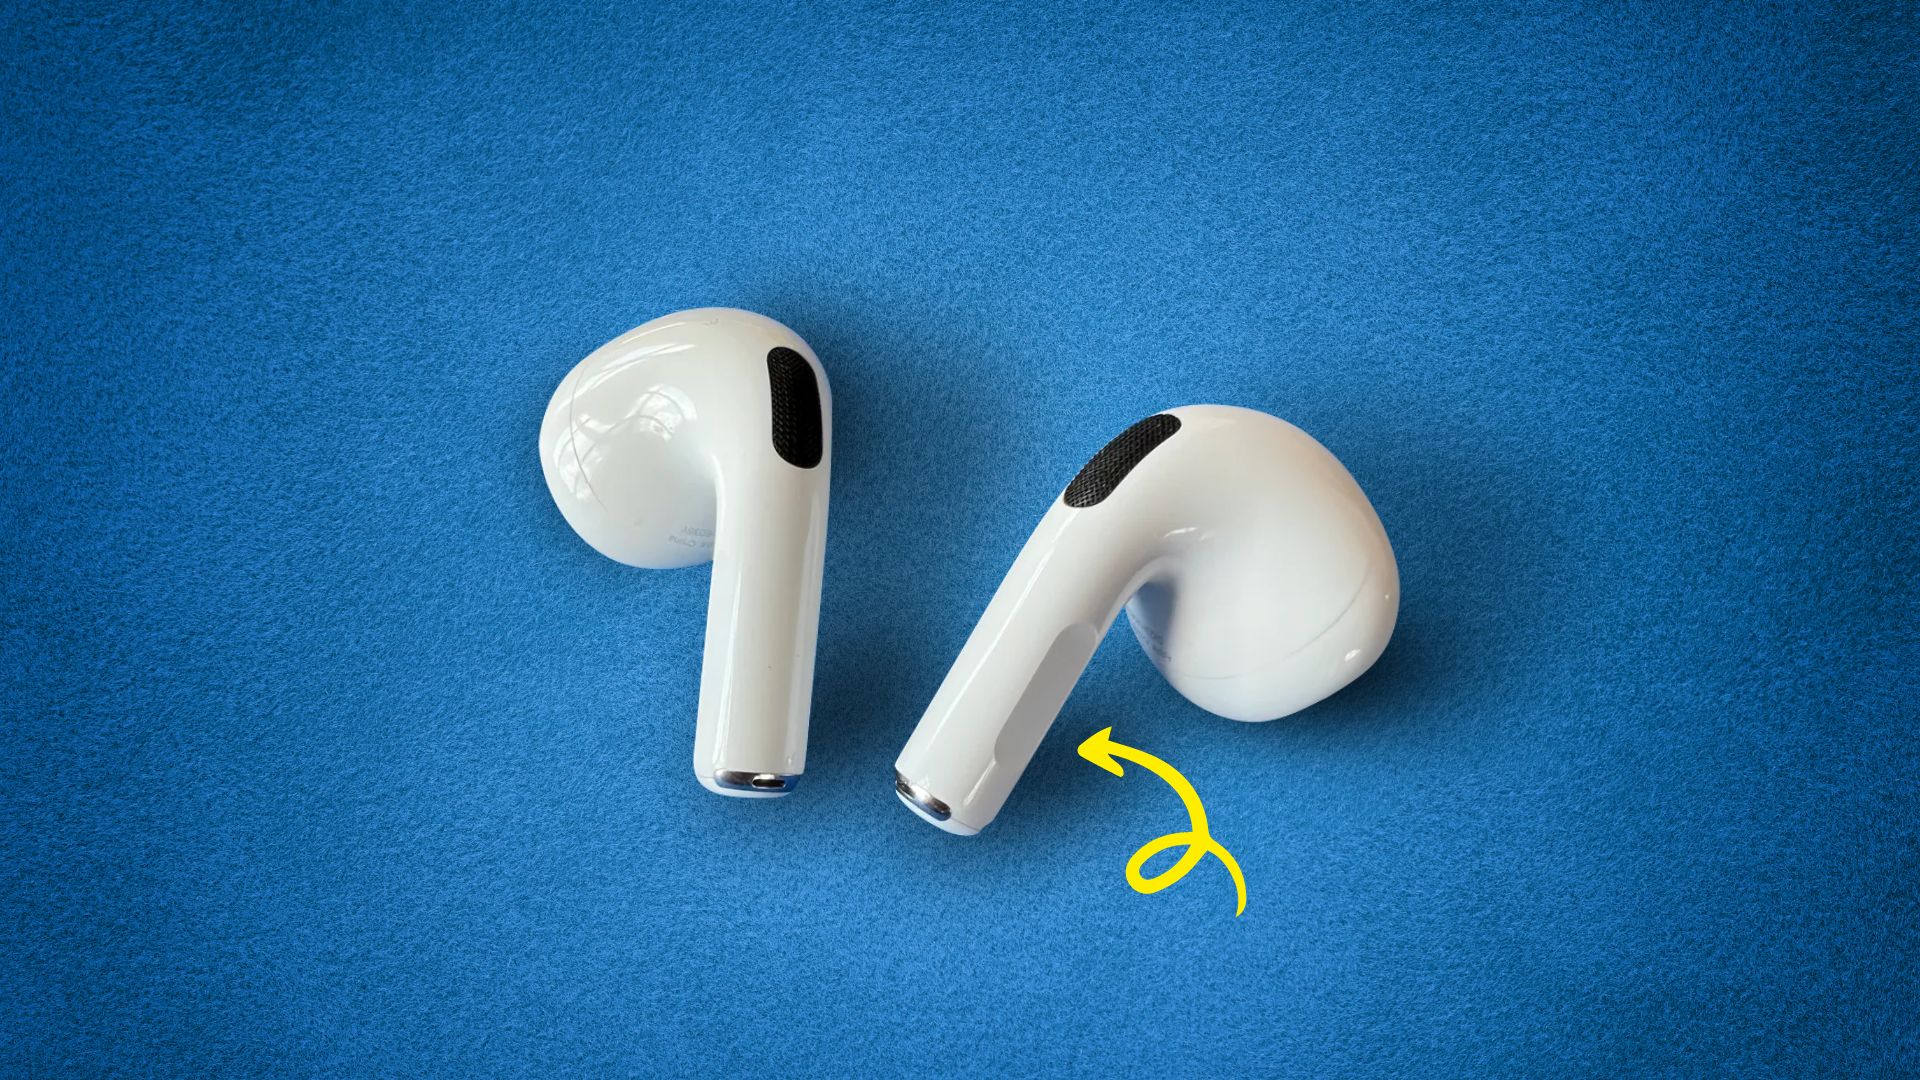 Airpods Pro’s 2 press and 3 press to skip audio